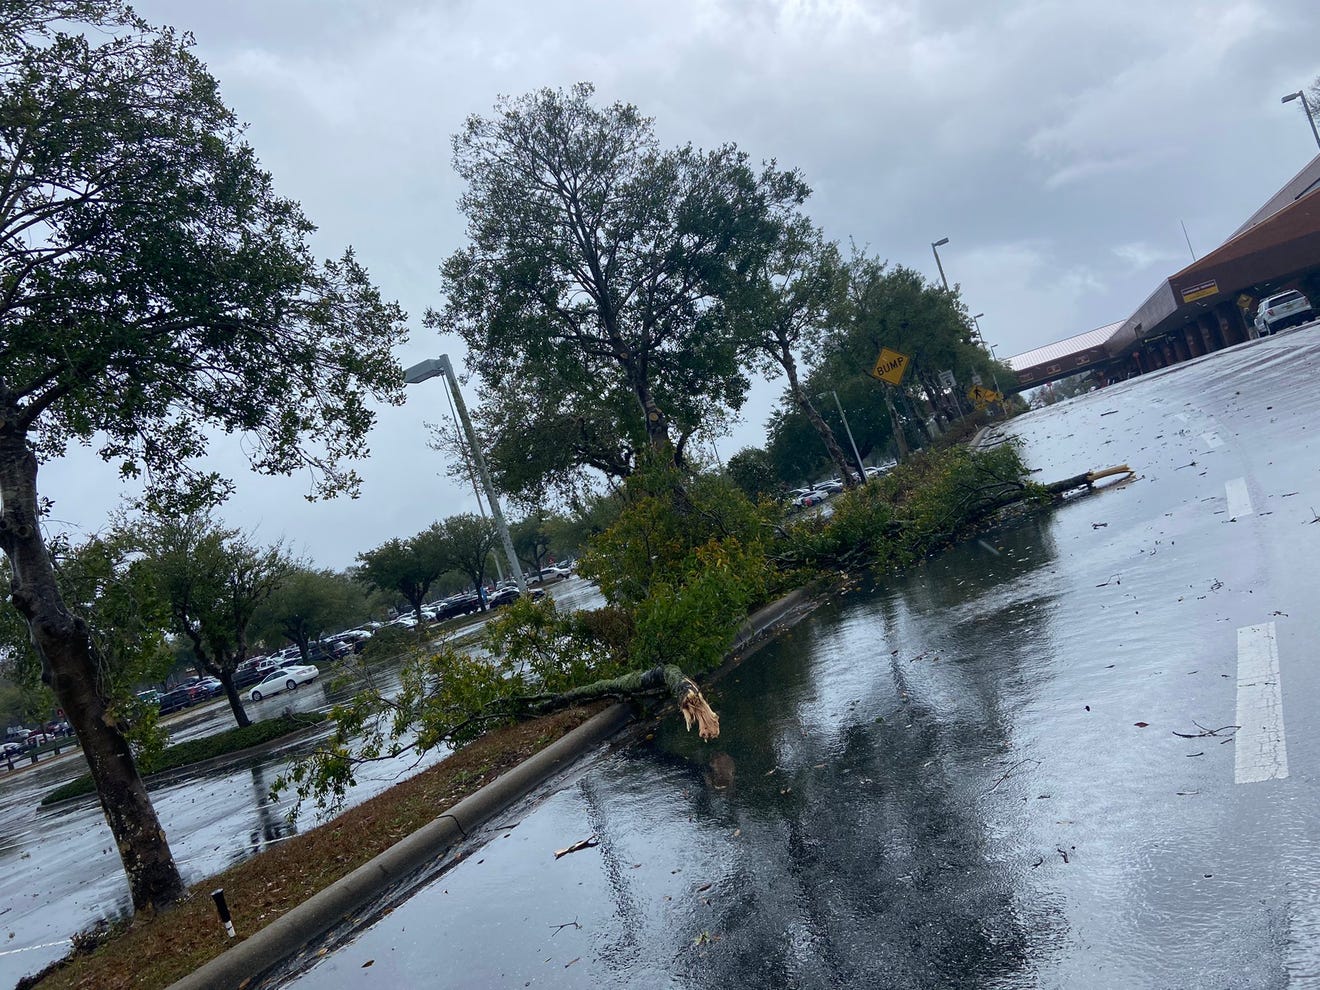 Tallahassee tornado Touchdown near airport, power outages reported